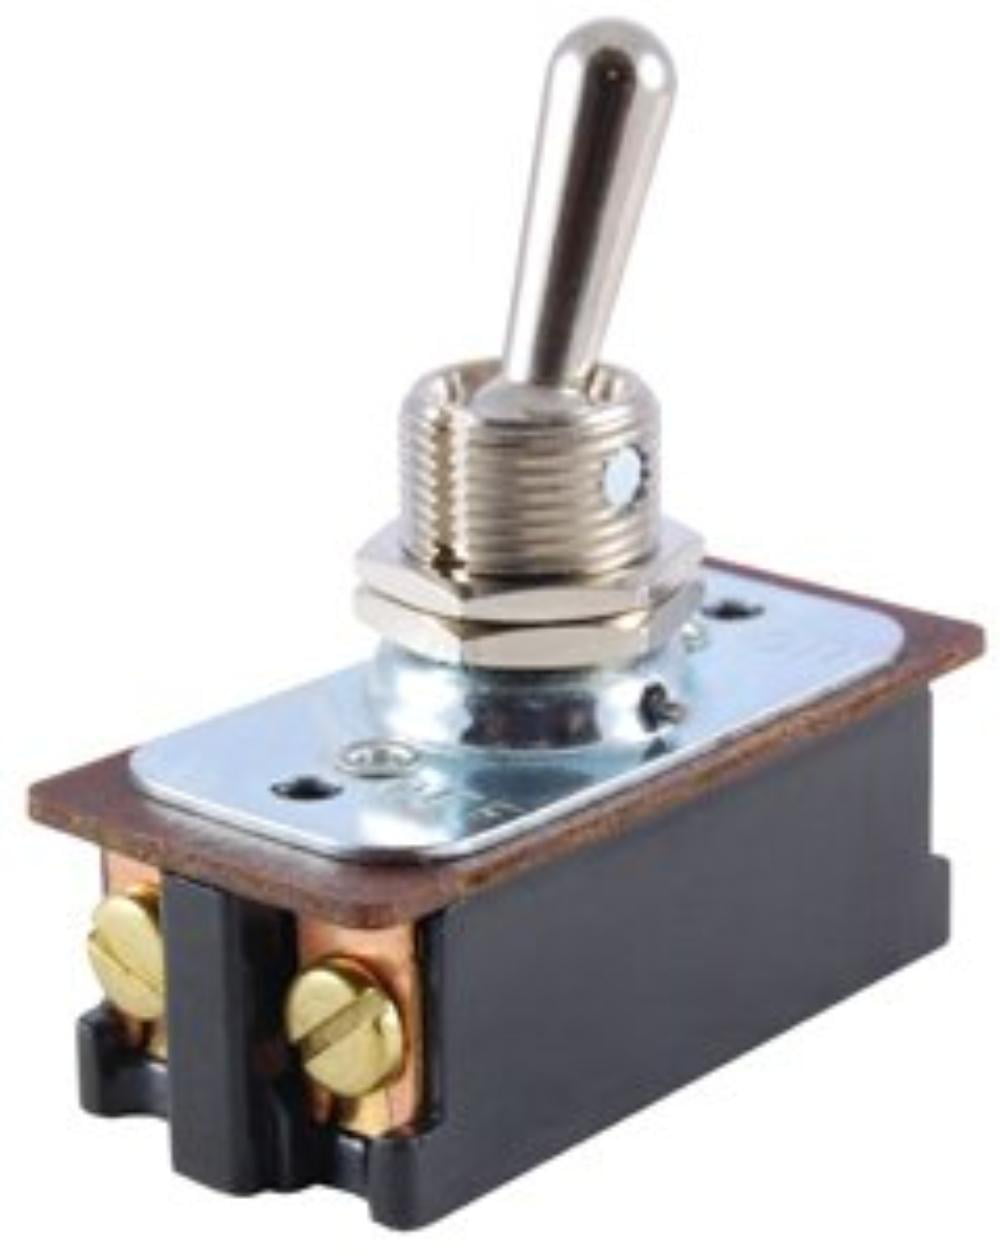 NTE Electronics 54-096 Bat Handle Toggle Switch SPST Circuit On-None-On Action 125V Inc. 6 Amp Brass/Nickel Plate Actuator Screw Mount Terminal